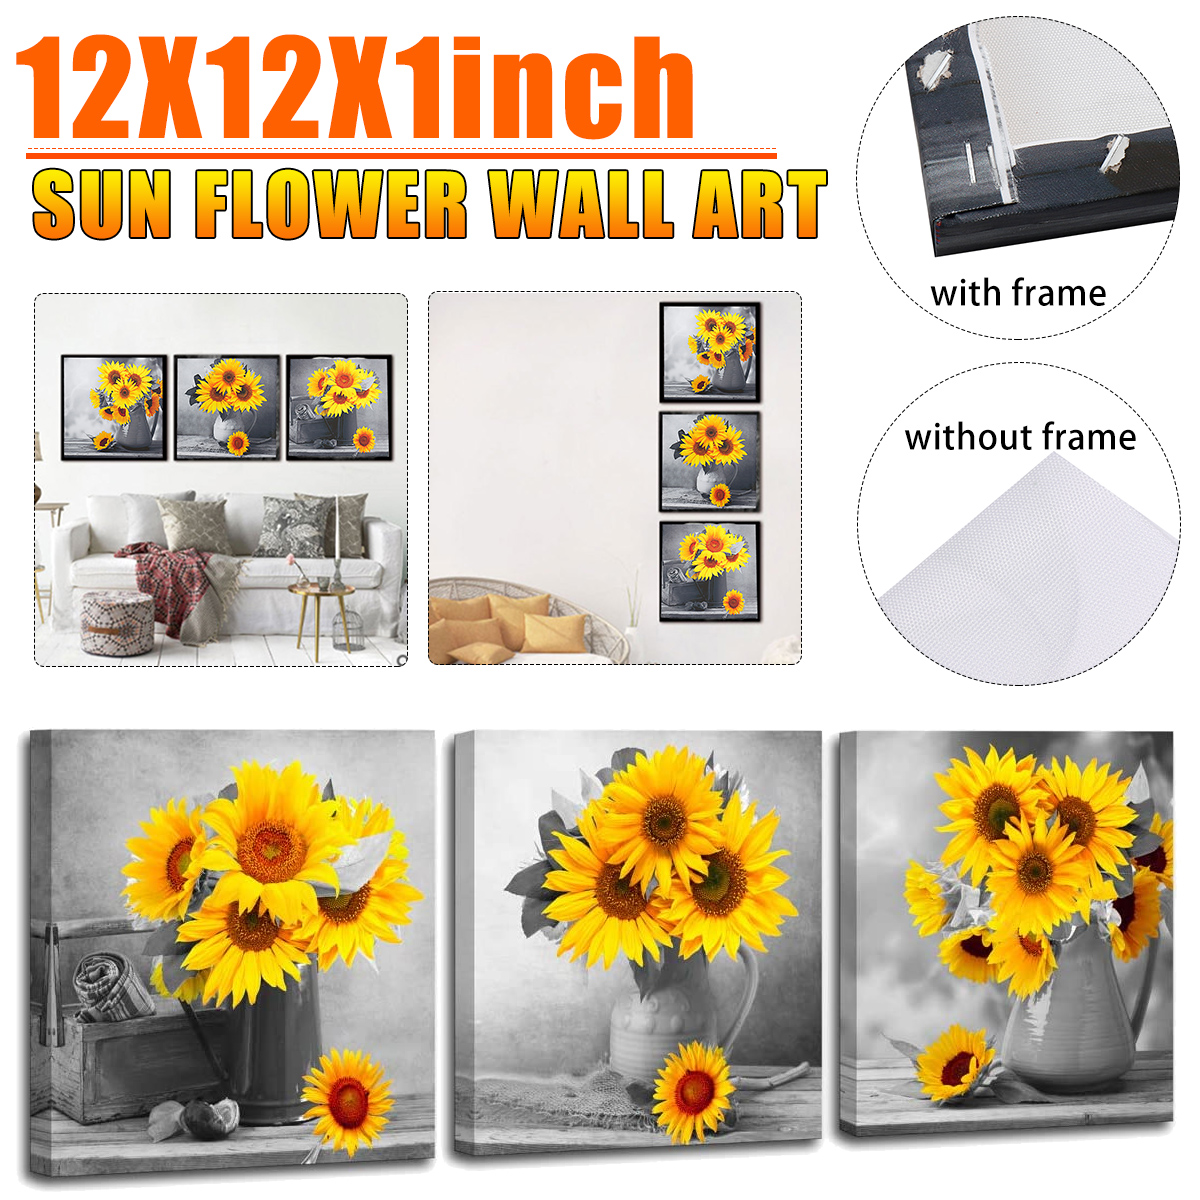 30303-cm-Sunflower-Wall-Art-Painting-Living-Room-Bedroom-Hanging-Canvas-Pictures-Office-Mural-Decora-1791798-1